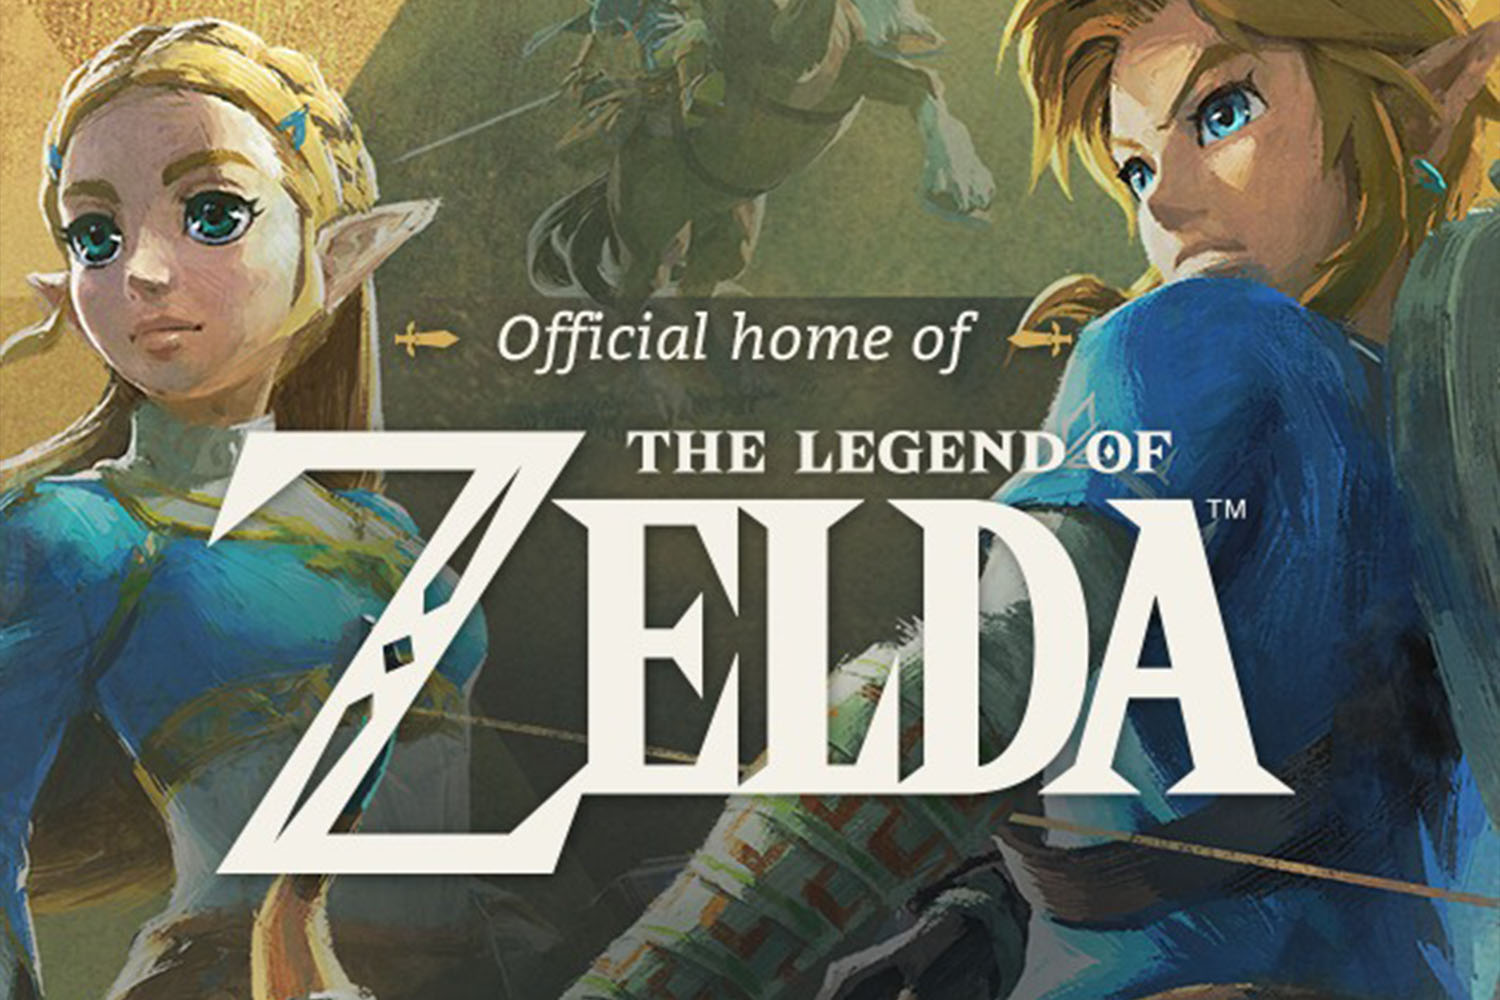 The Legend of Zelda video game cover